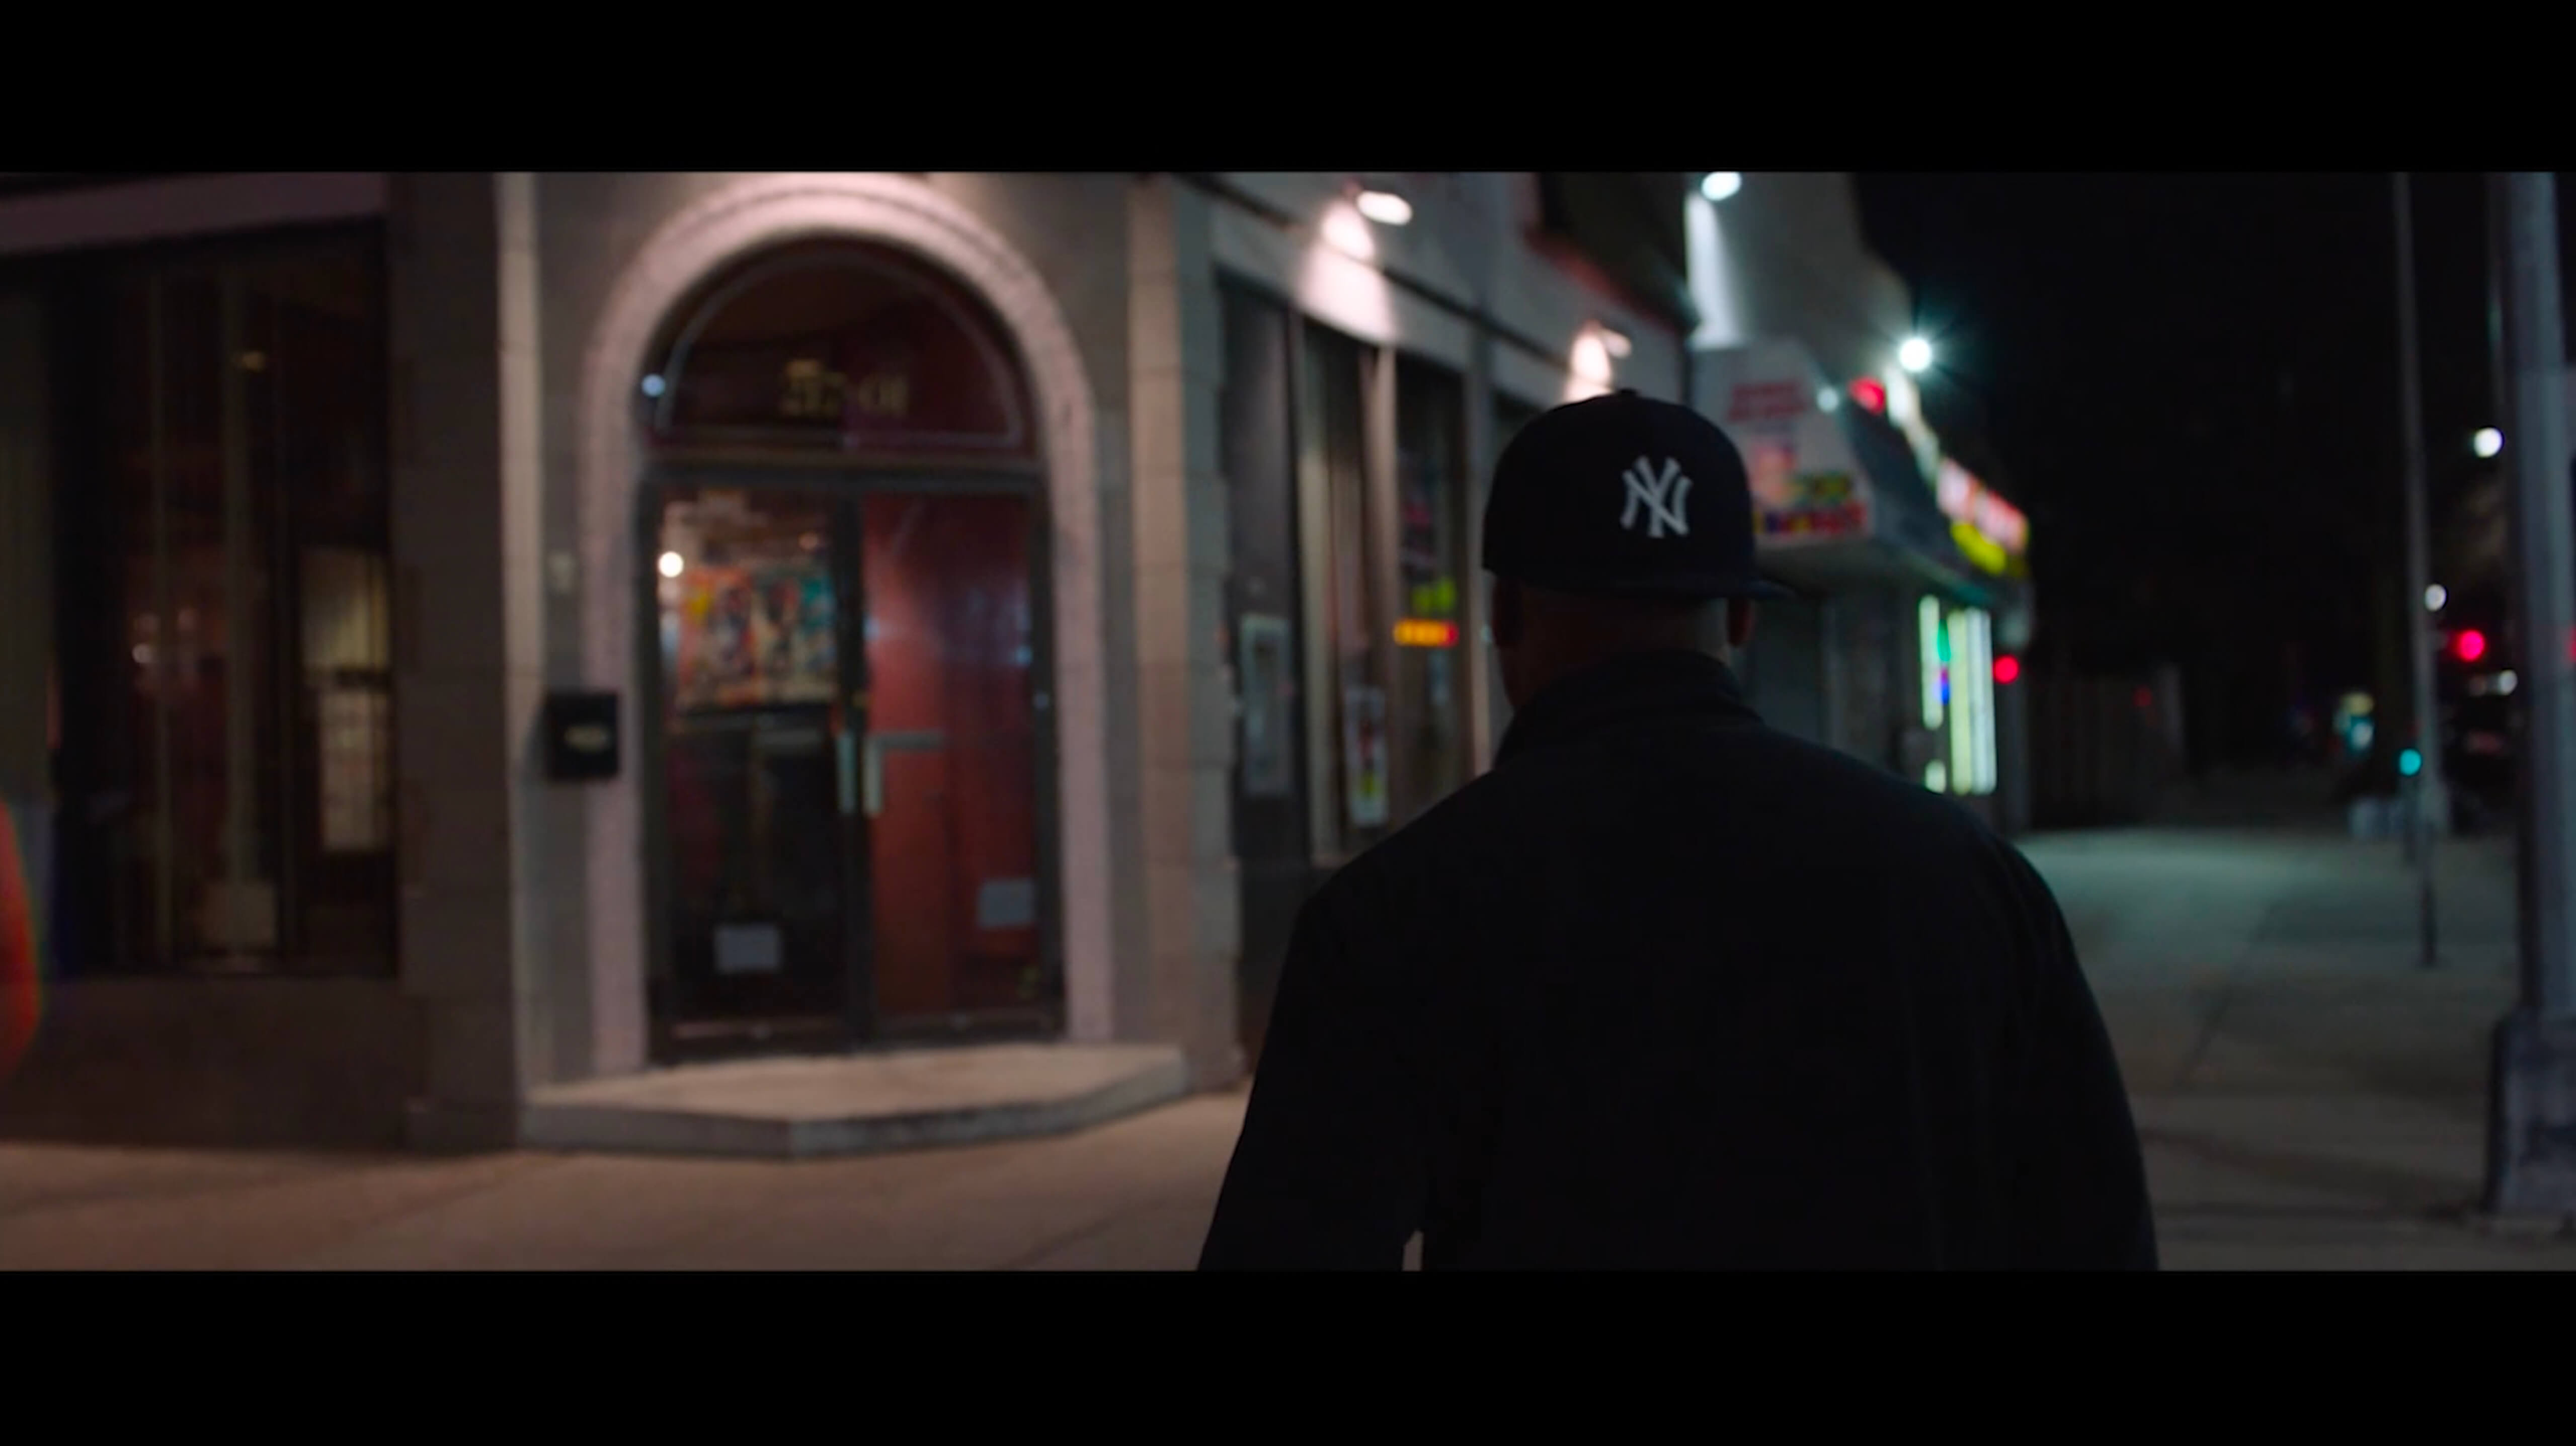 A man walking away from the camera wearing a Yankees cap.